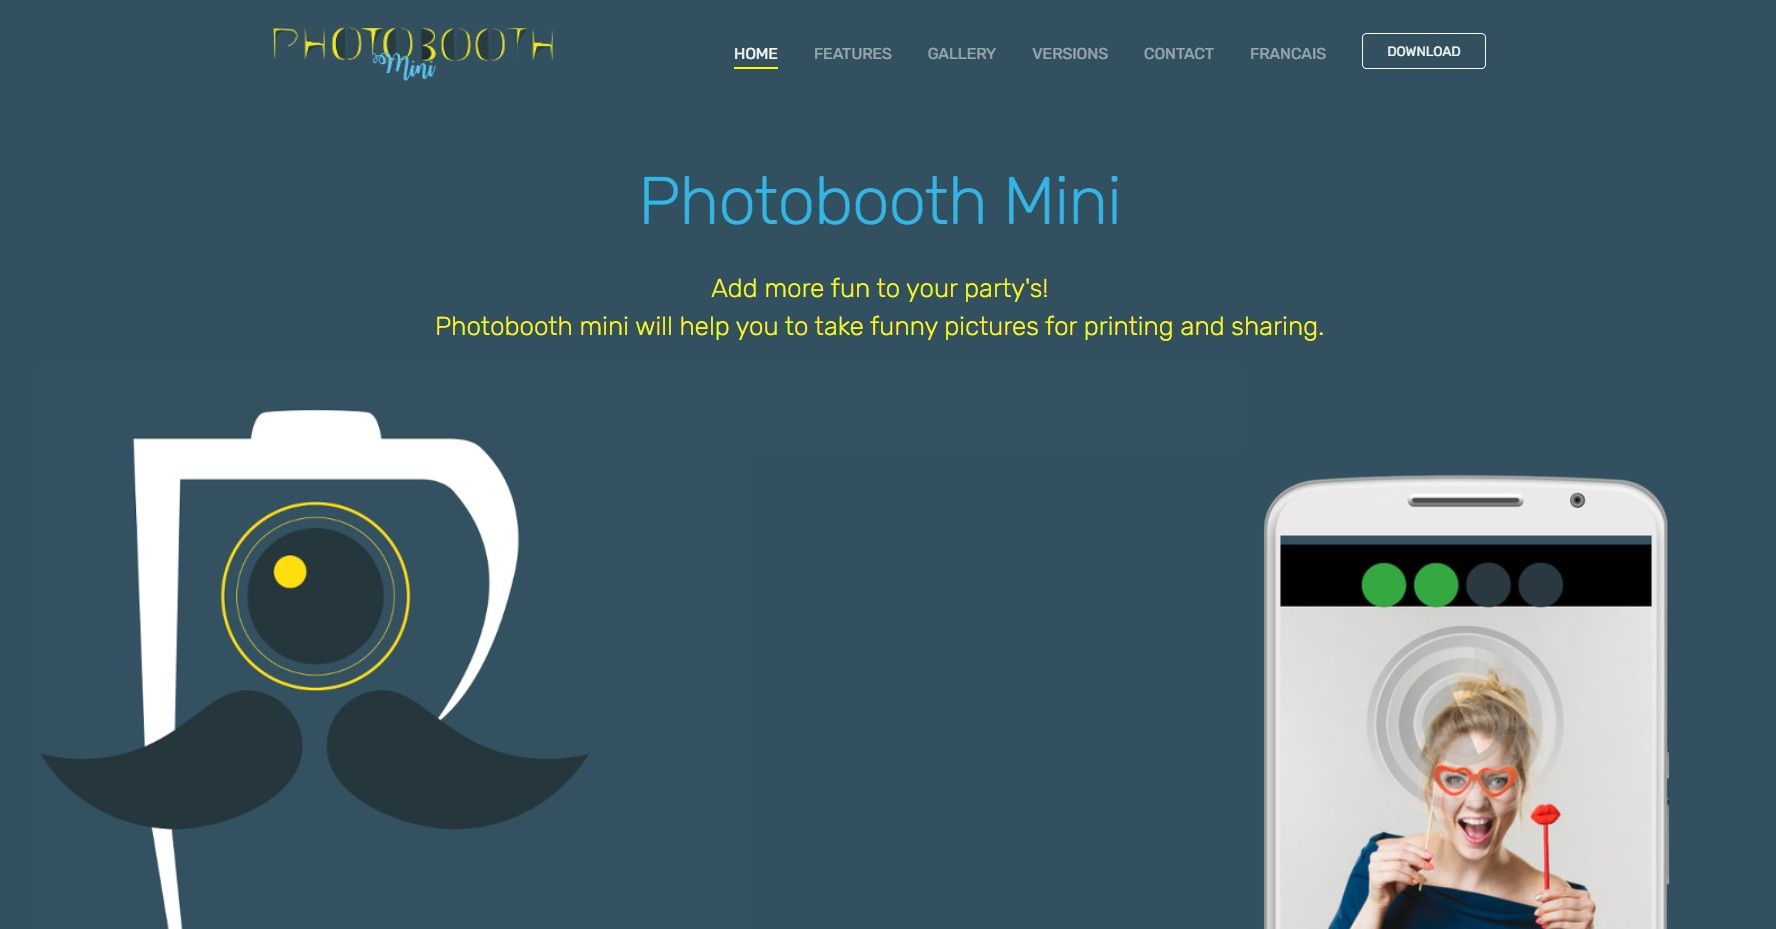 Photobooth Mini - User-Friendly and Customizable Photo Booth App for Fun Event Capturing